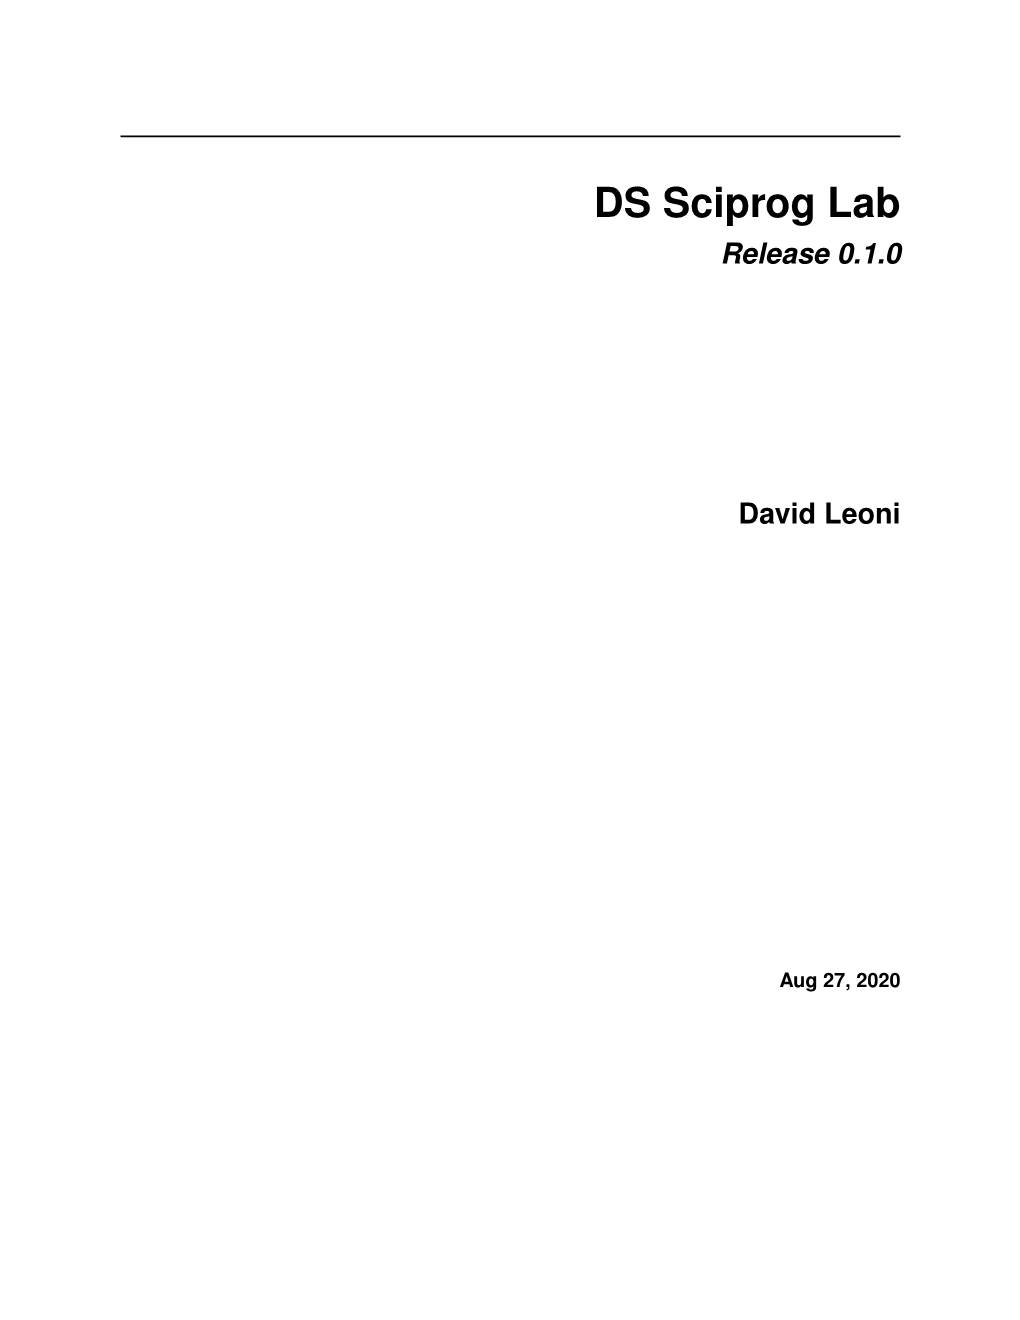 DS Sciprog Lab Release 0.1.0